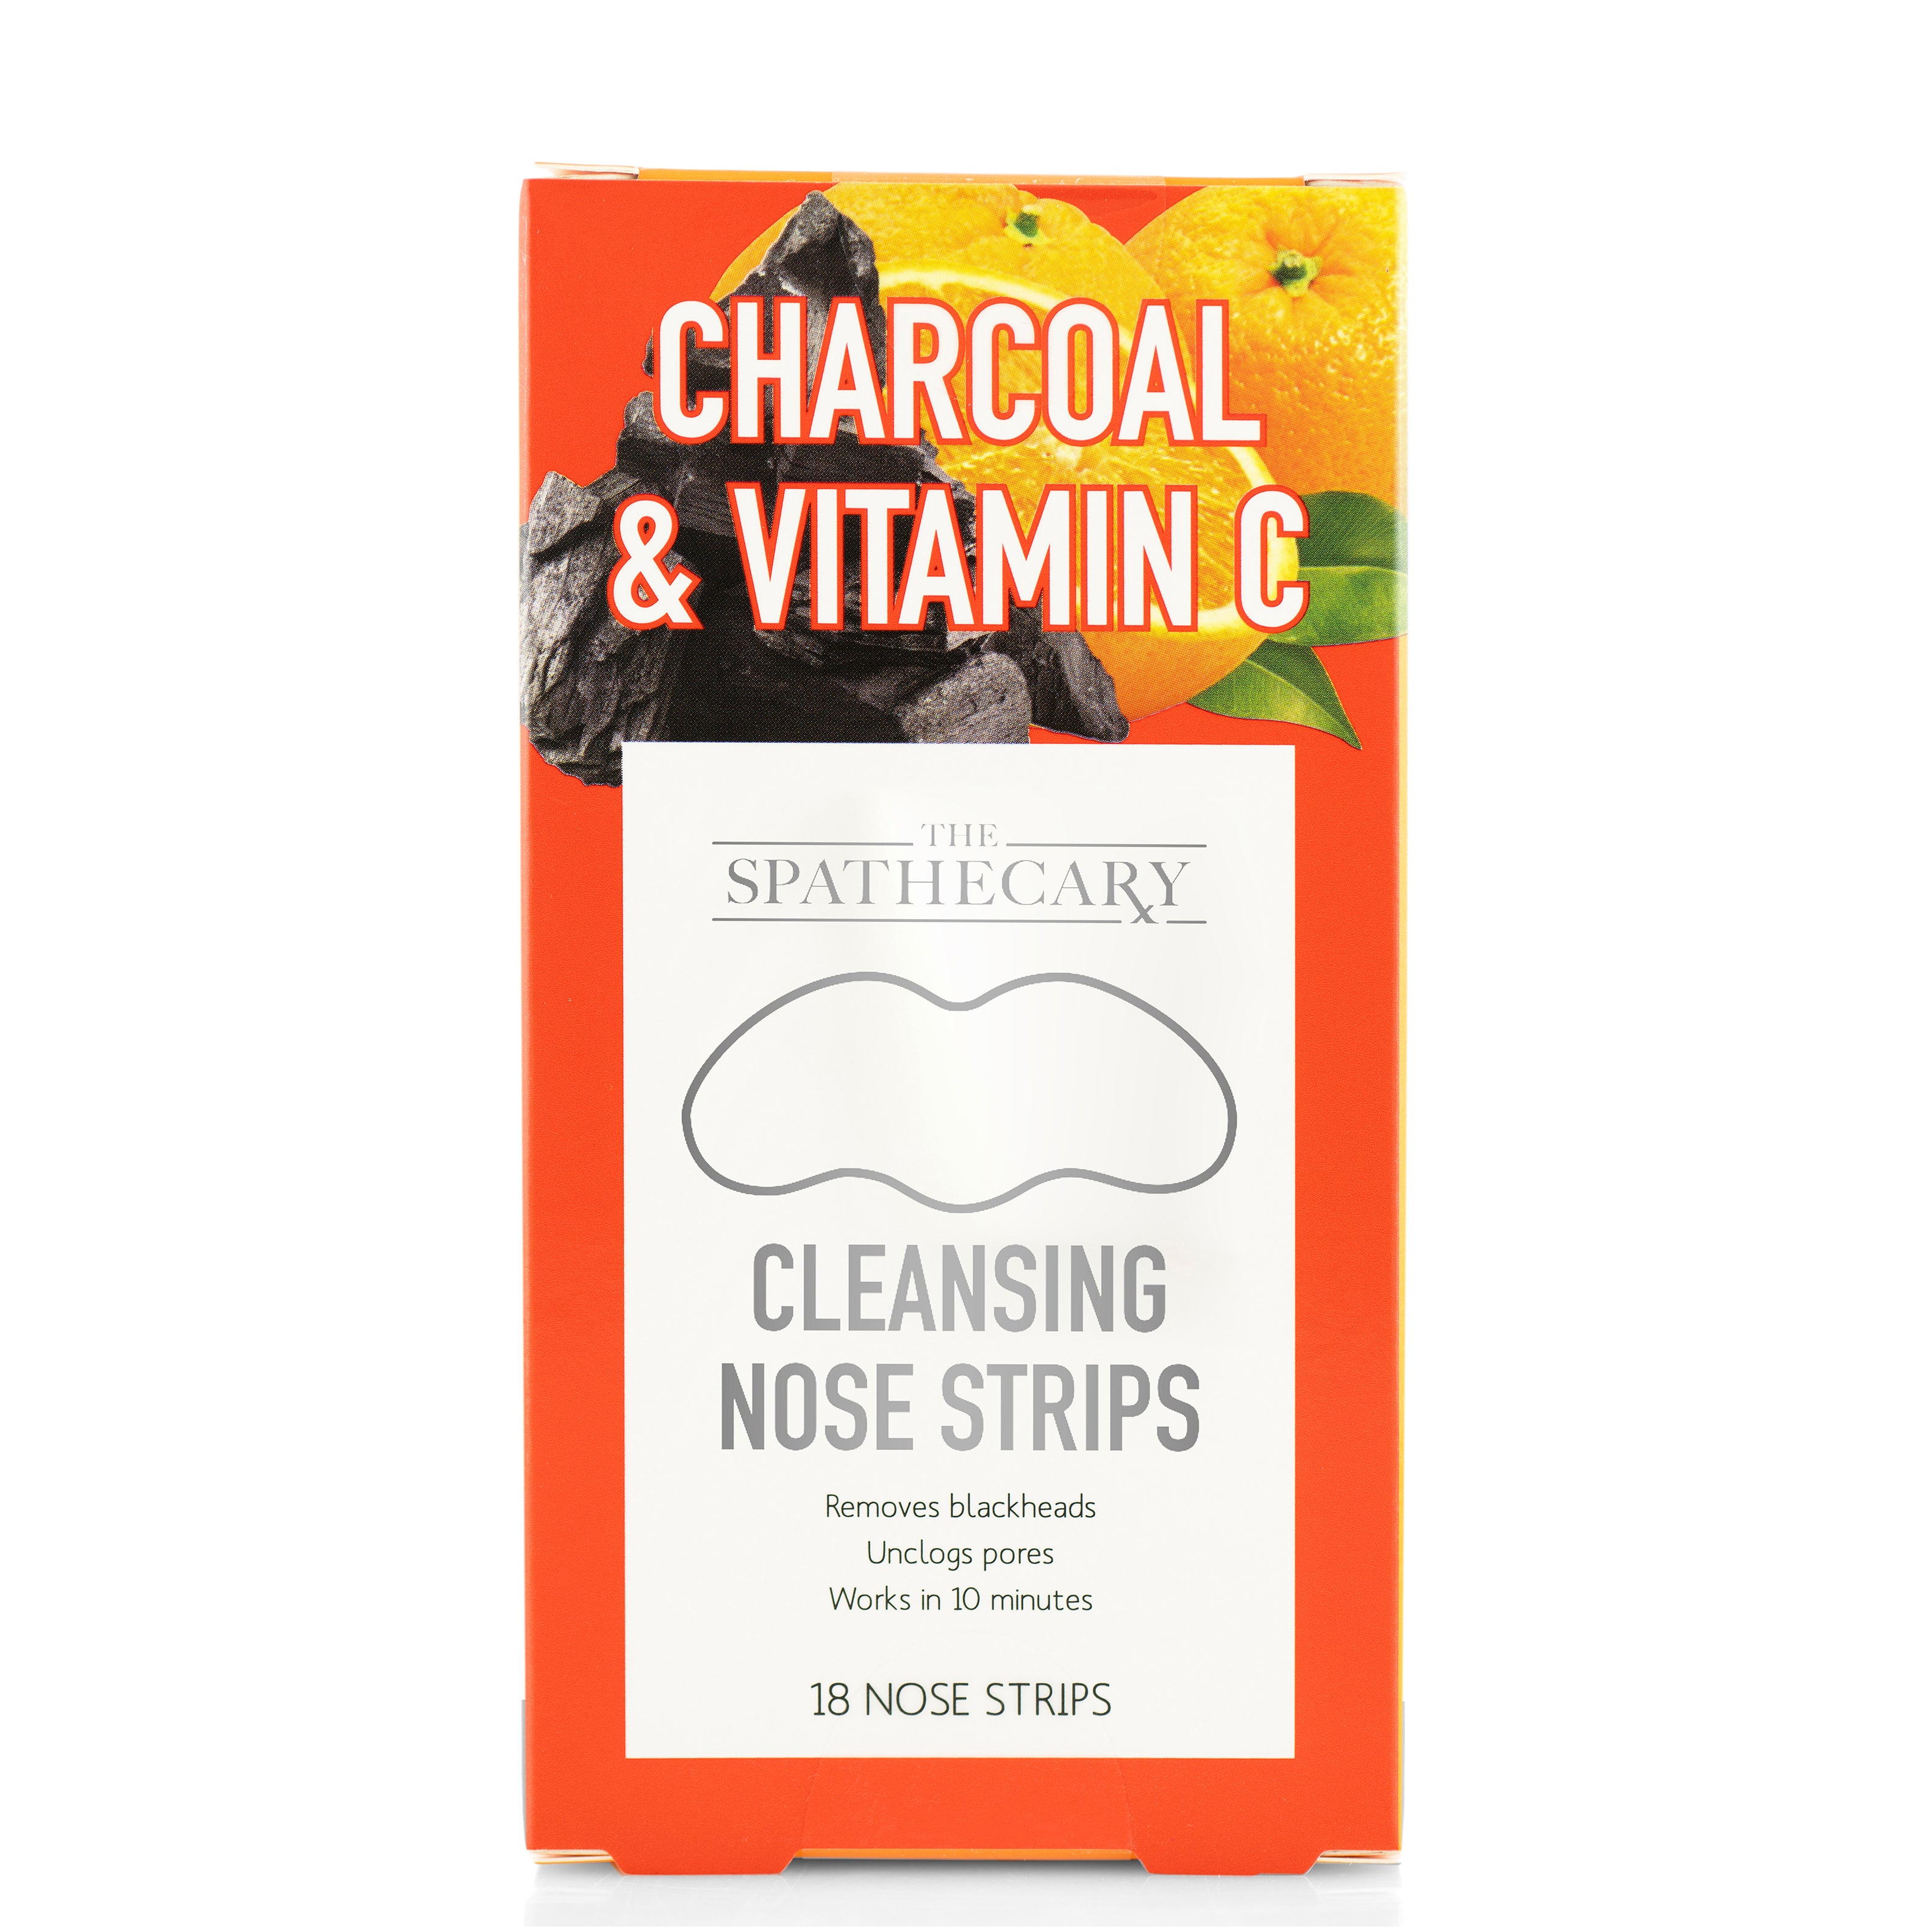 Charcoal & Vitamin C Nose Strips (18ct)